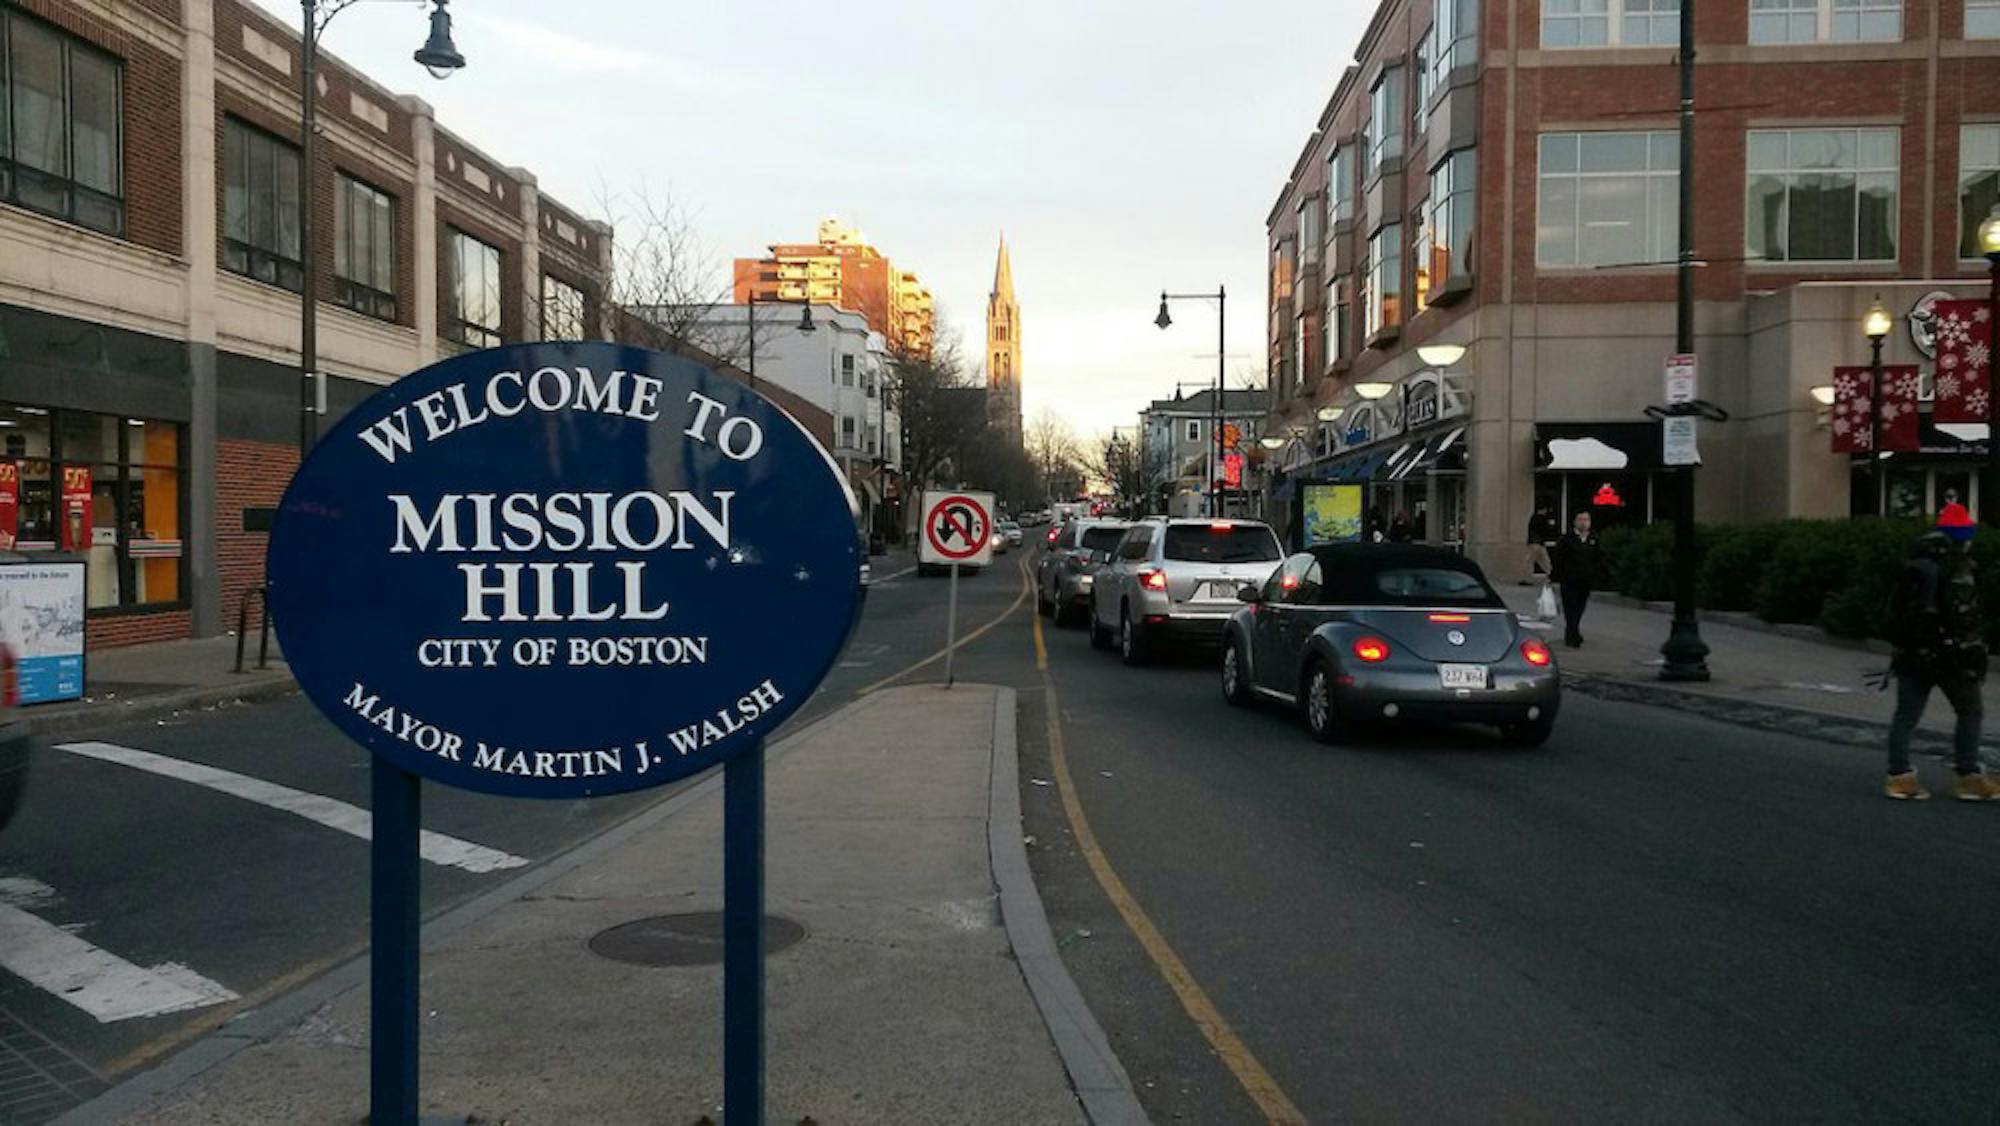 The_entrance_to_the_Mission_Hill_neighborhood_of_Boston_on_Tremont_Street_at_its_intersection_with_Huntington_Avenue_and_Francis_Street._2